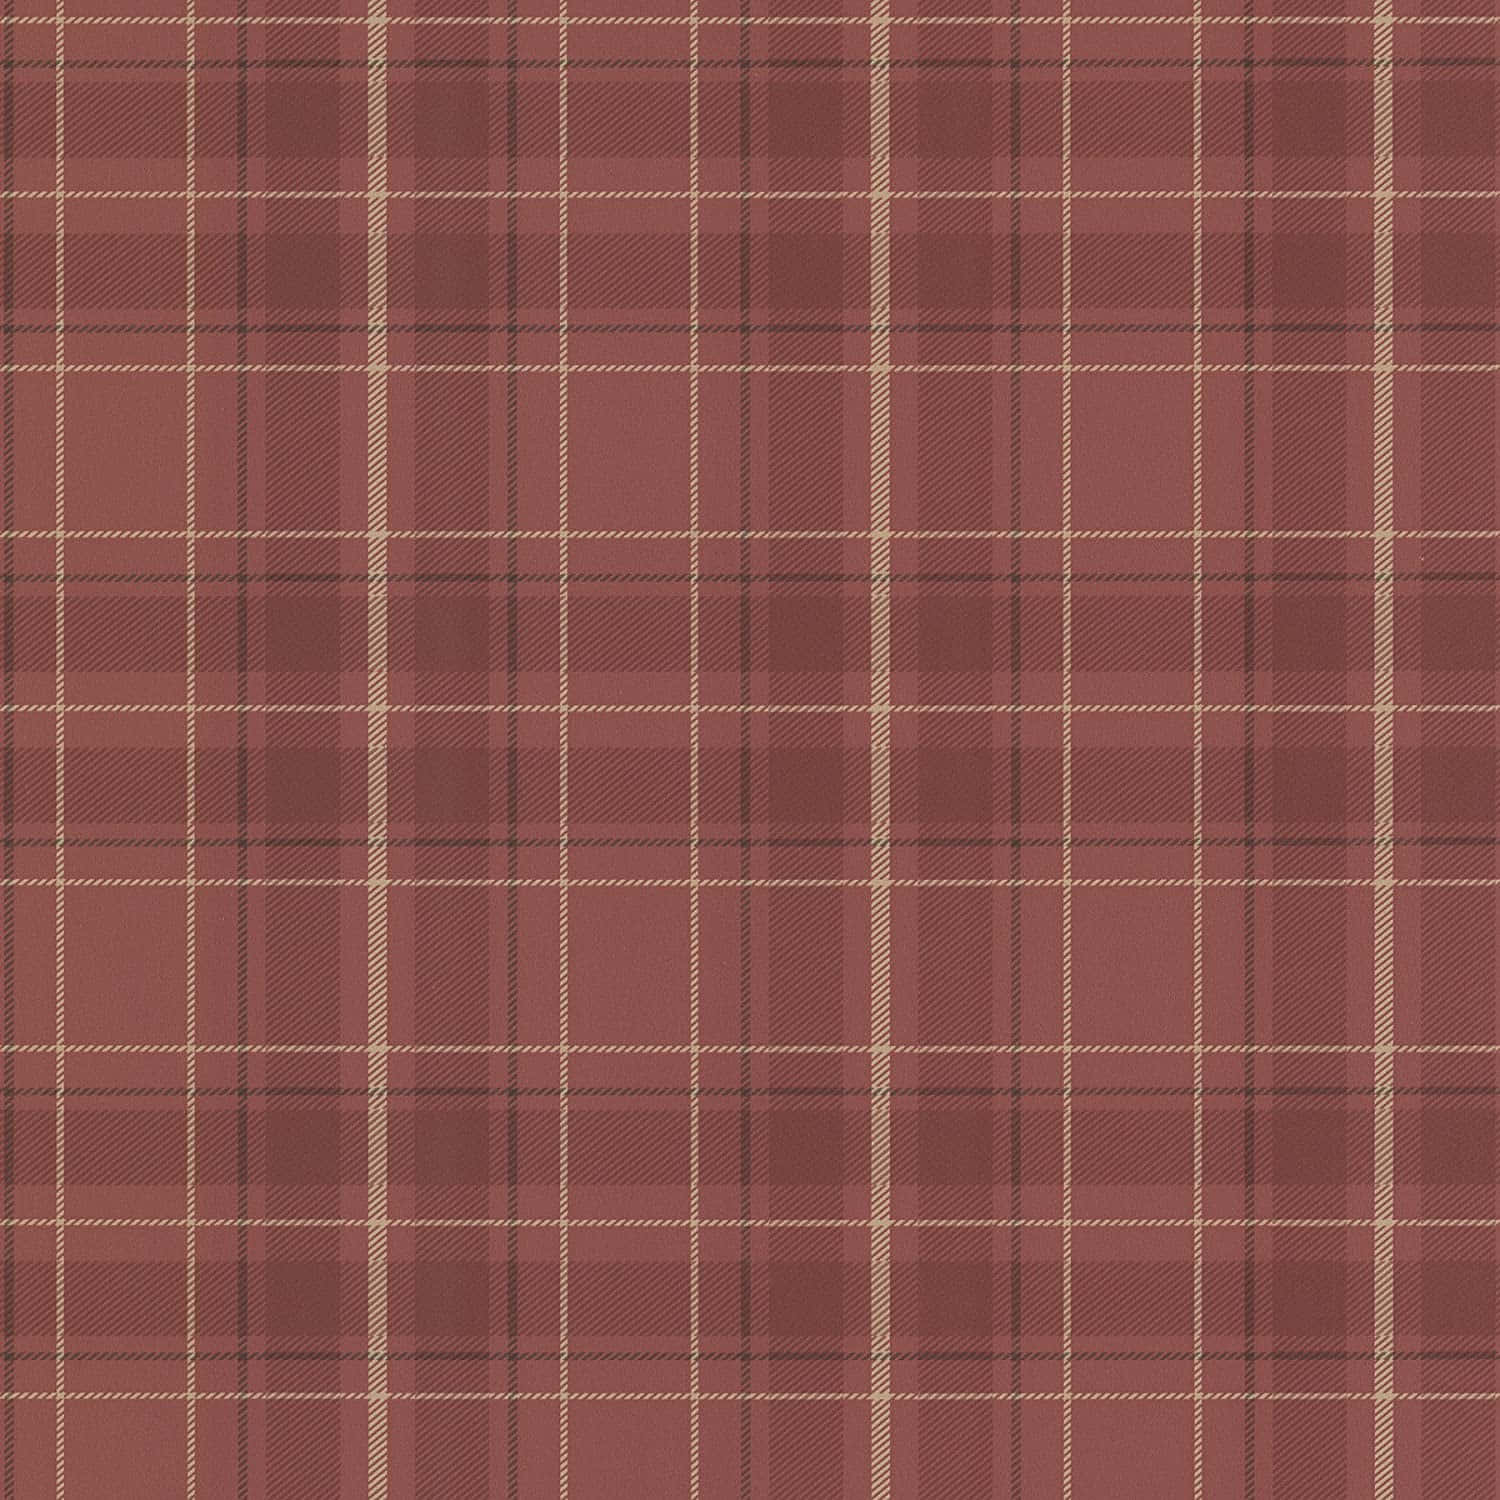 A Red Colored Plaid Patterned Wallpaper